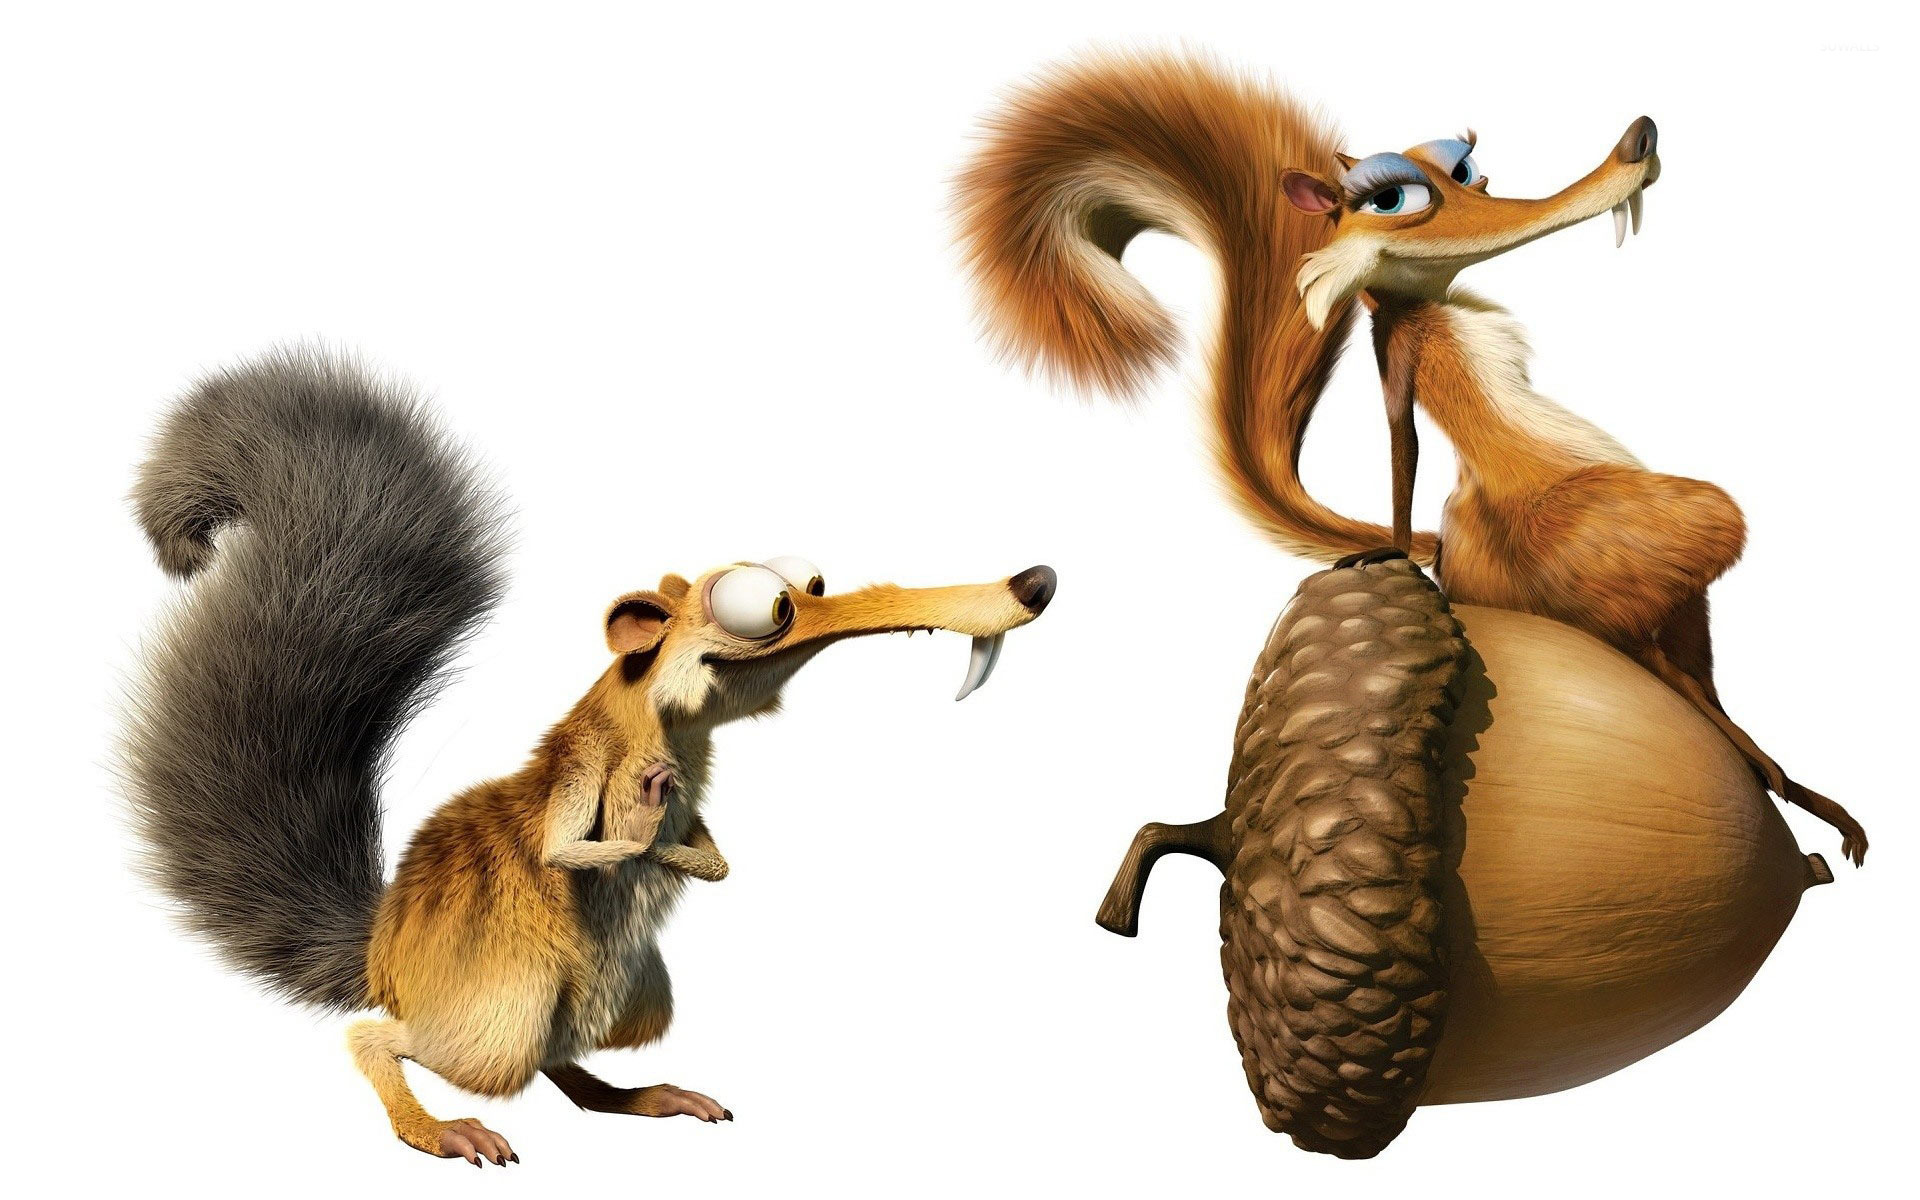 for ios download Ice Age: Dawn of the Dinosaurs